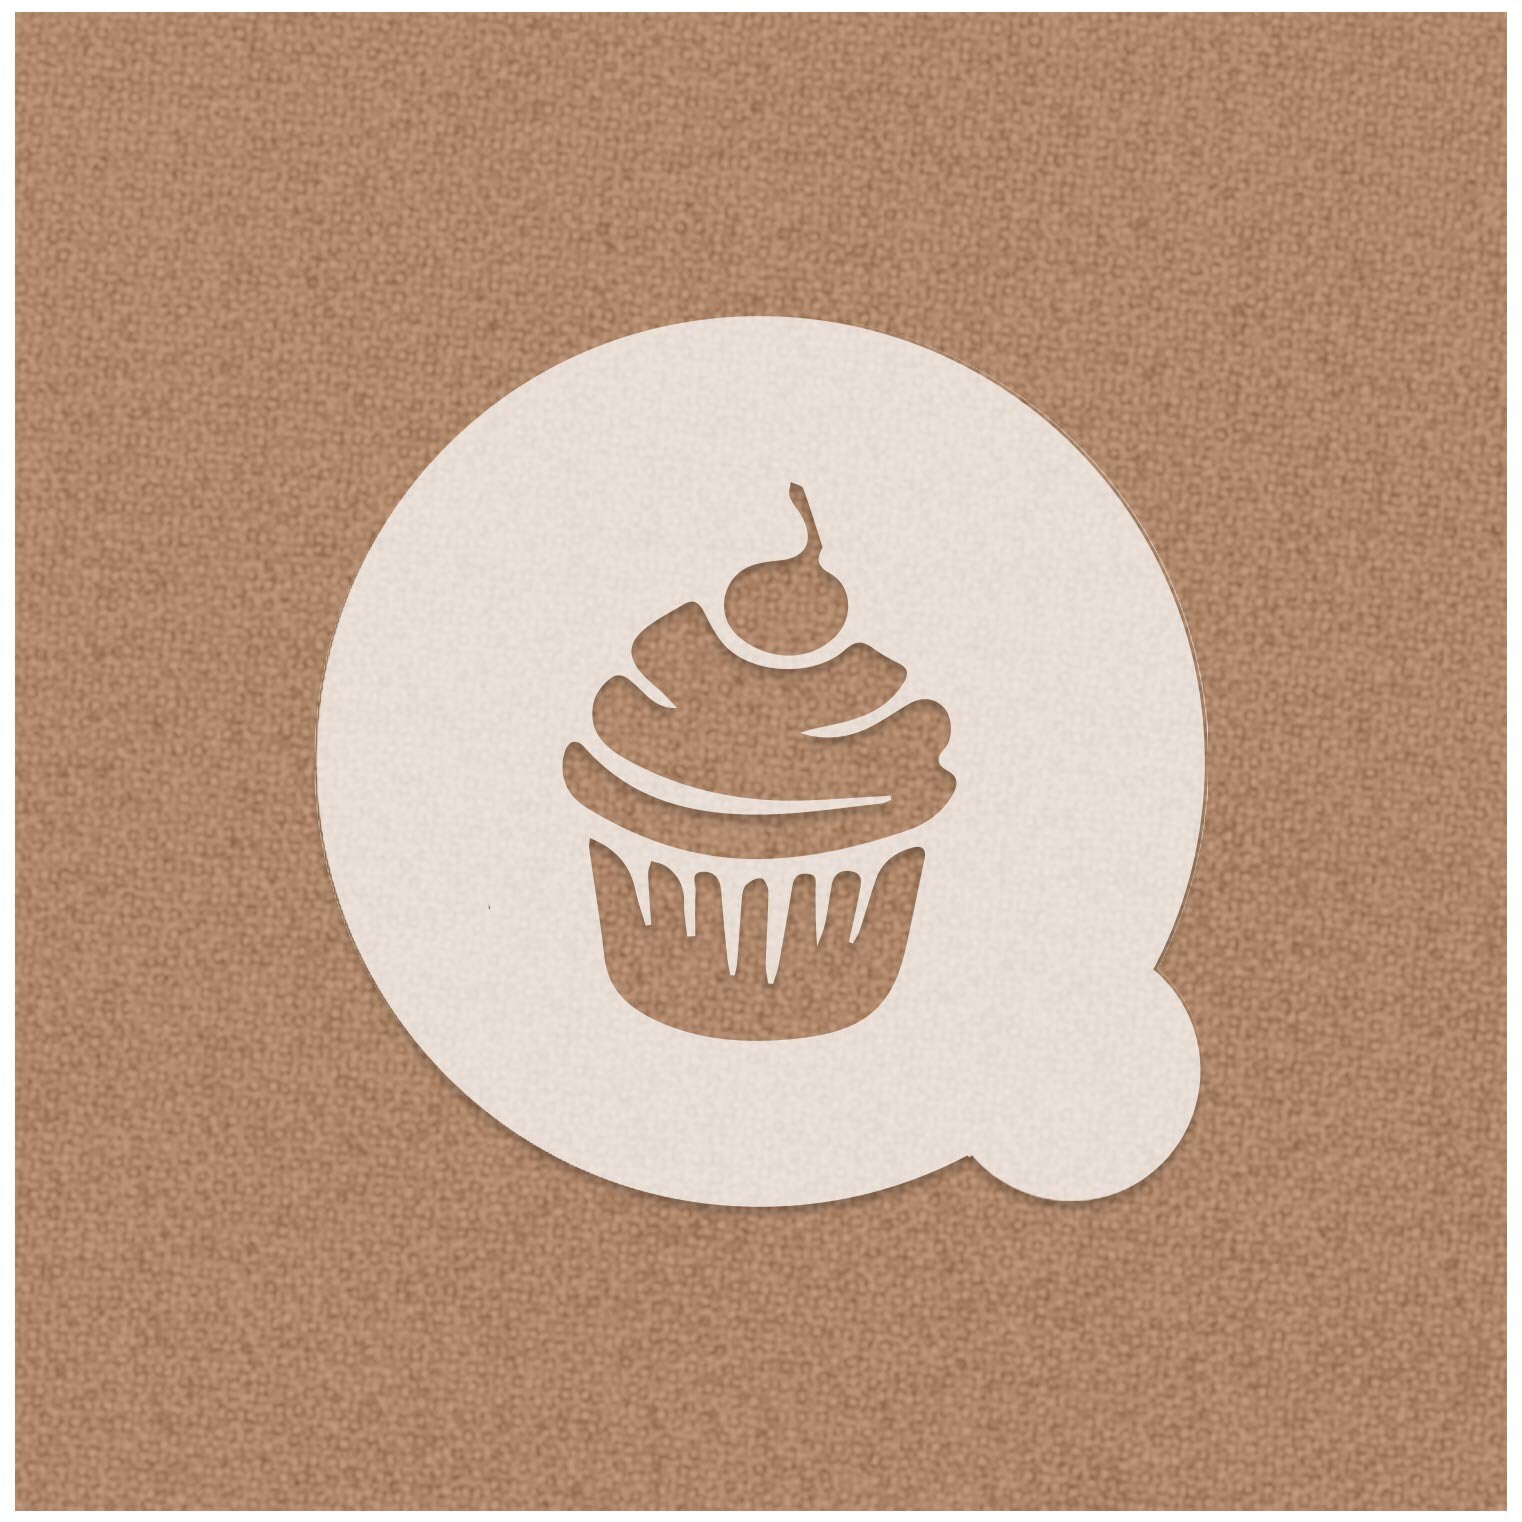 Other, Cd Dior Stencil Template Coffee Cupcakes Diy Art